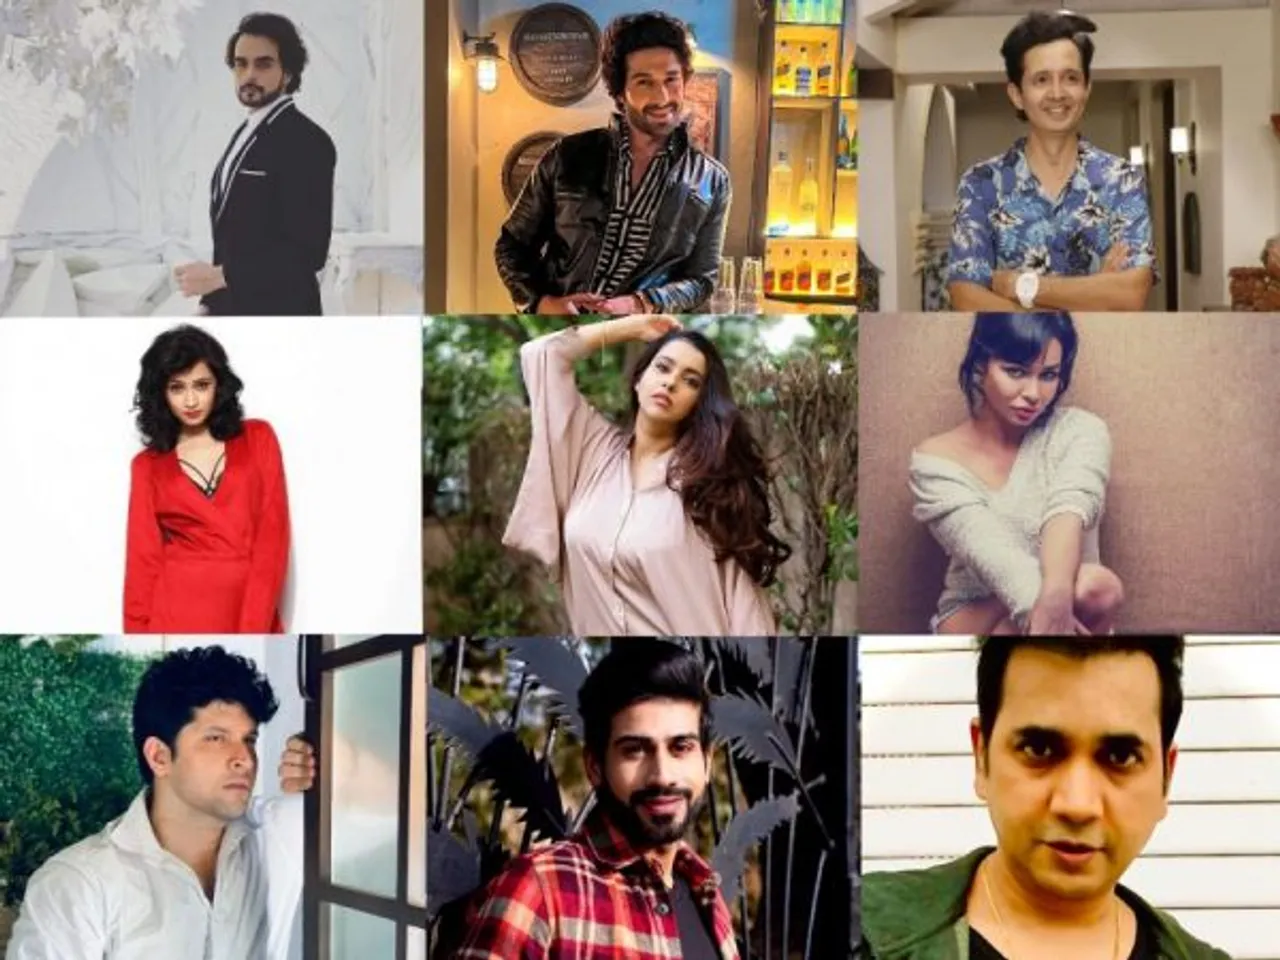 Fond of web series? Celebrities recommend the titles you should not miss